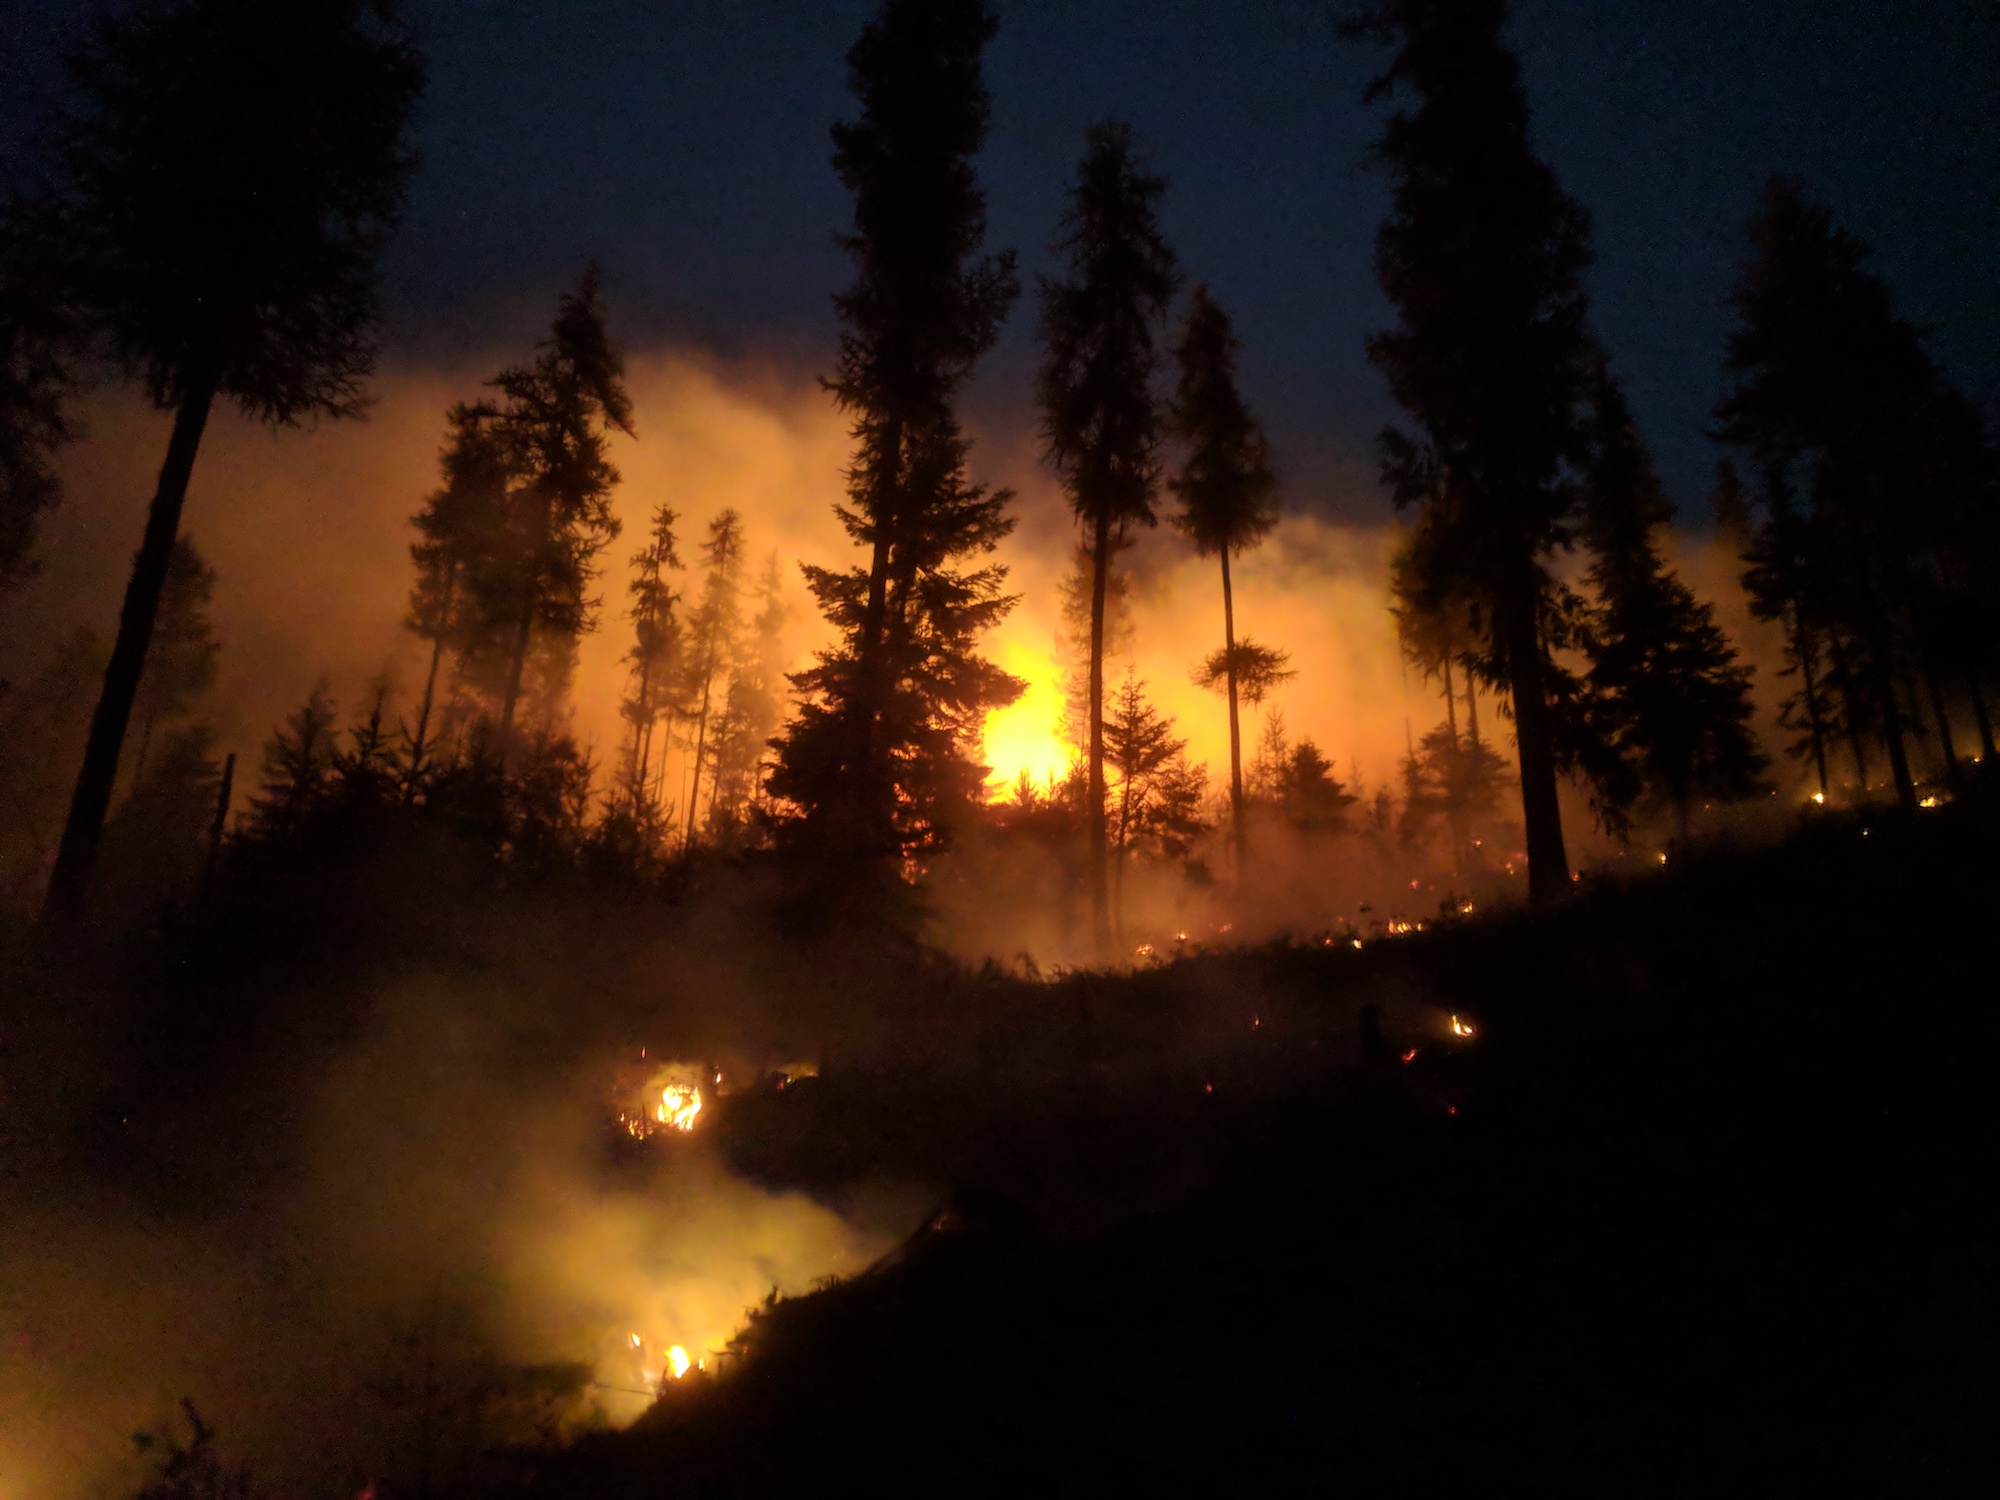 night scene with trees and wildfire smoke glowing